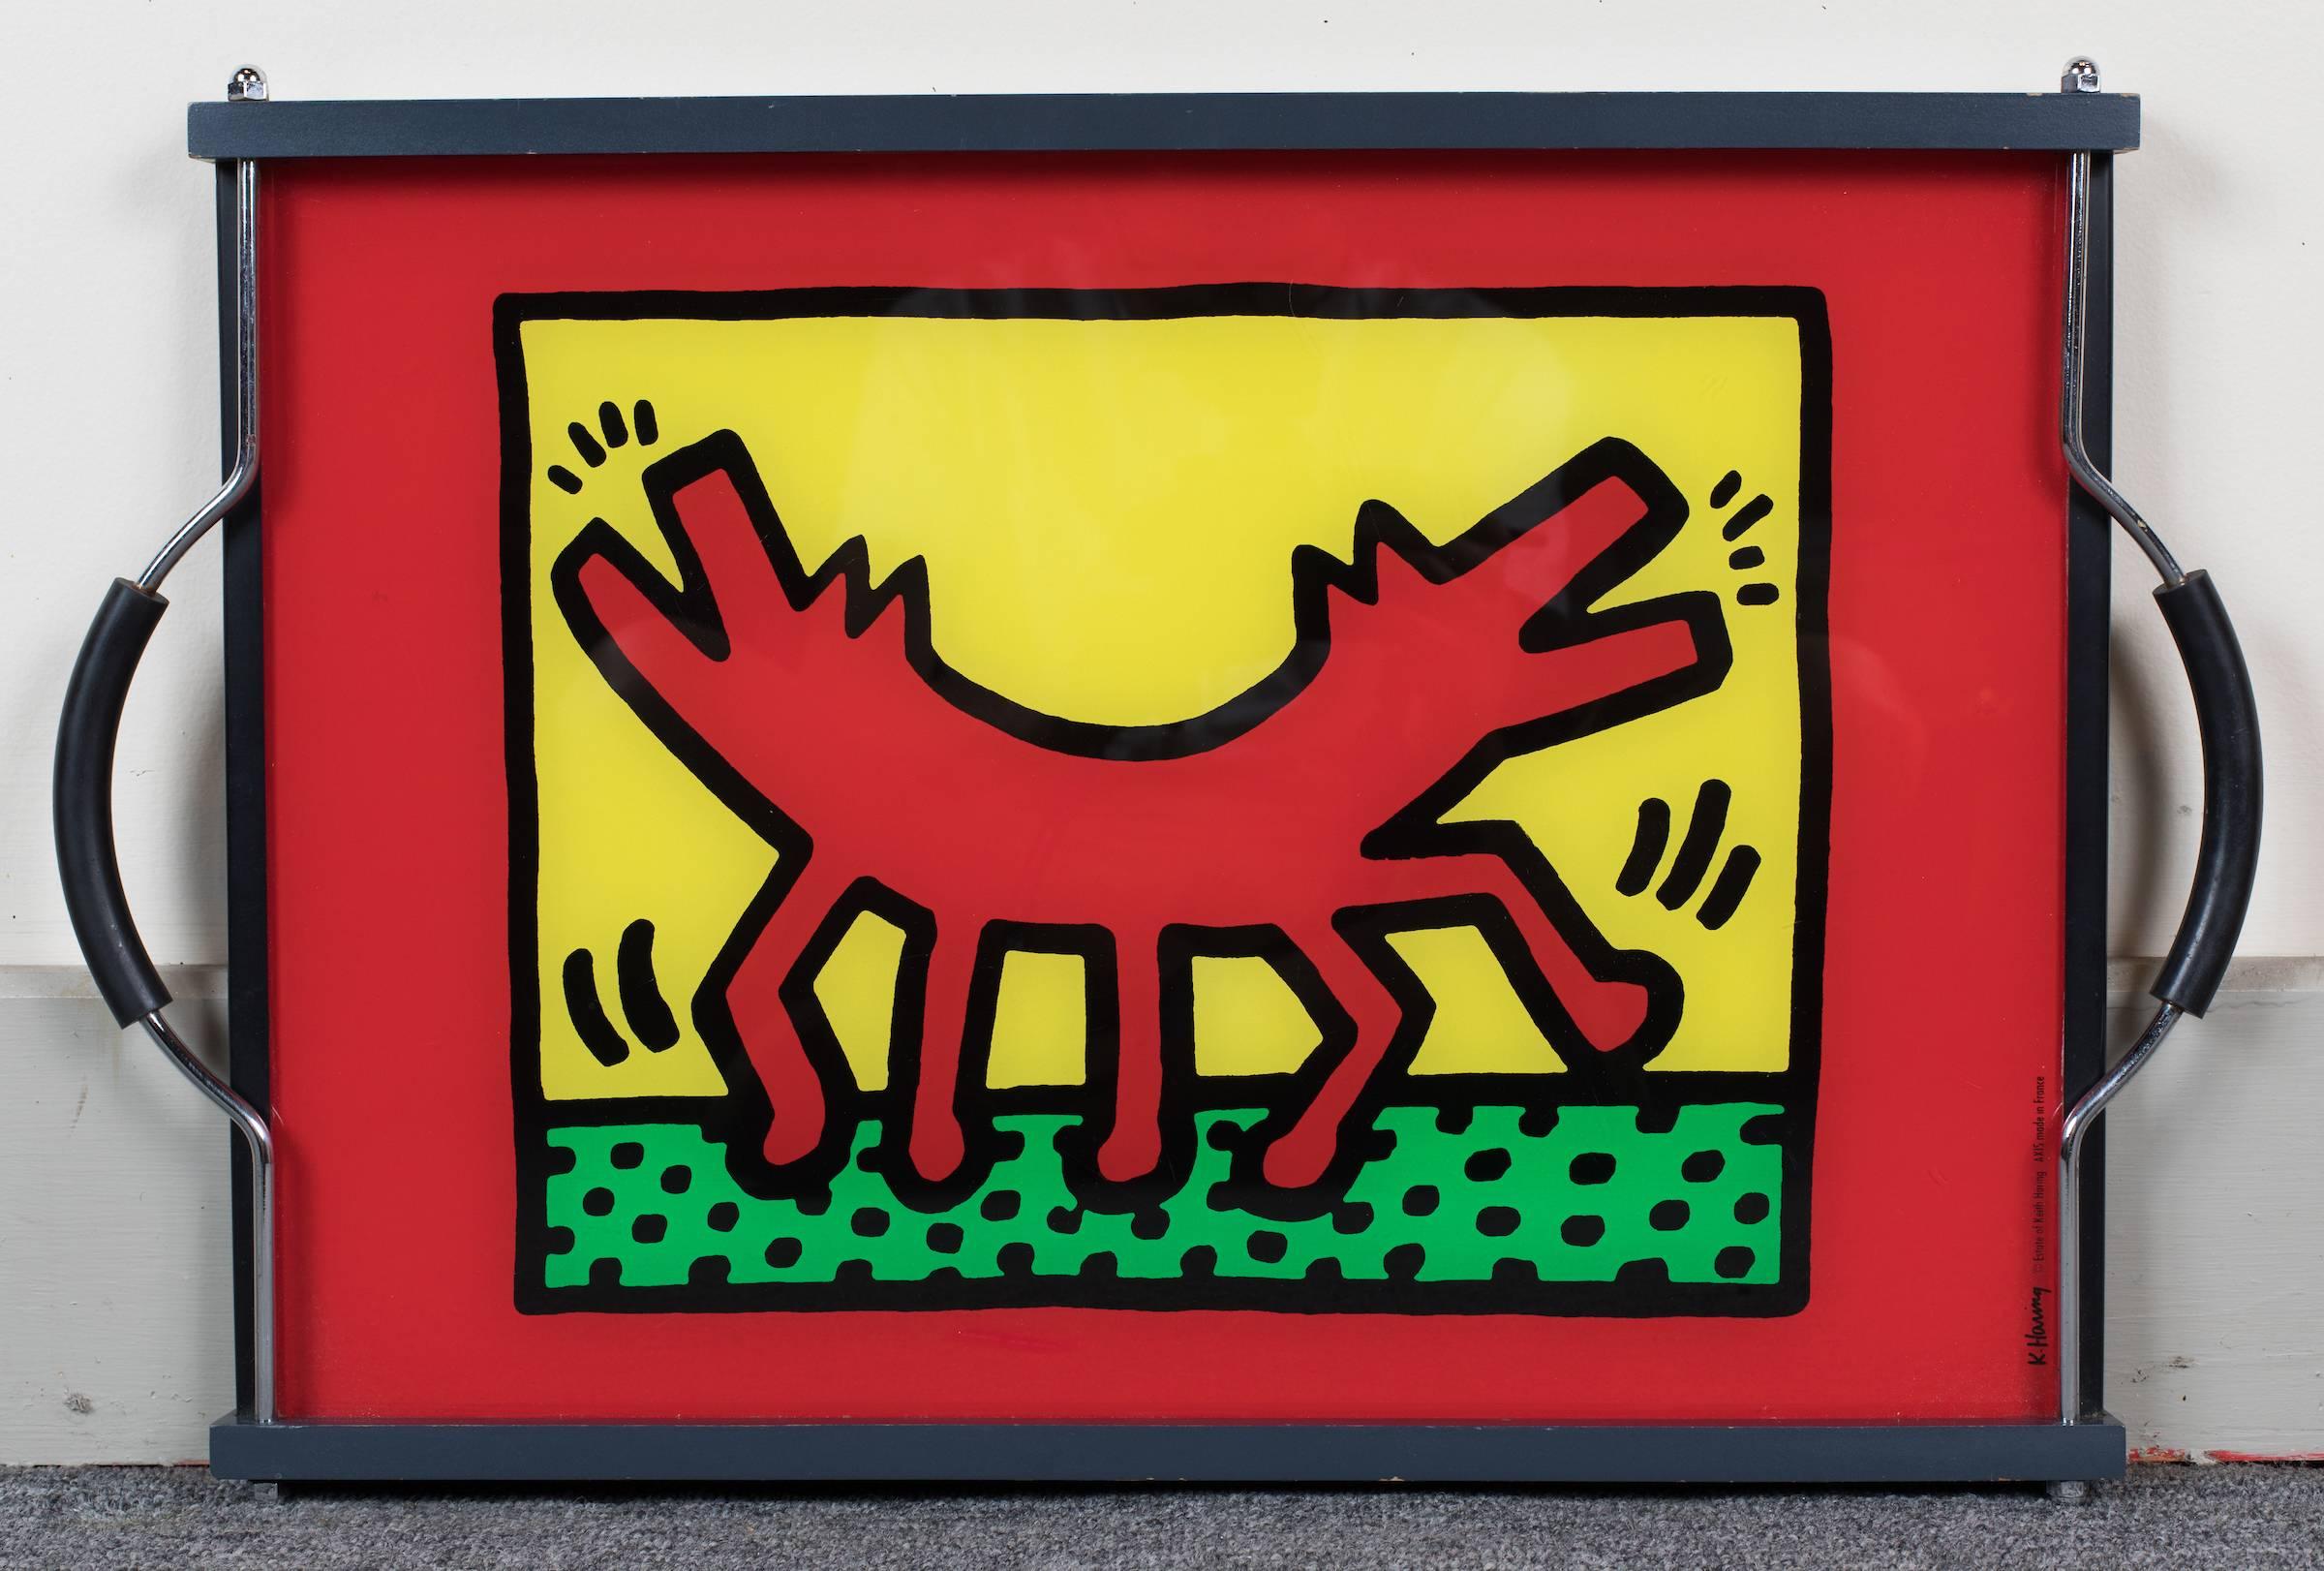 Whimsical Keith Haring eglomisé glass serving tray showing a double headed barking dog, fitted with chrome and rubber handles, the glass held with painted wood supports.
Signed: K. Haring, estate of Keith Haring, AXIS made in France.